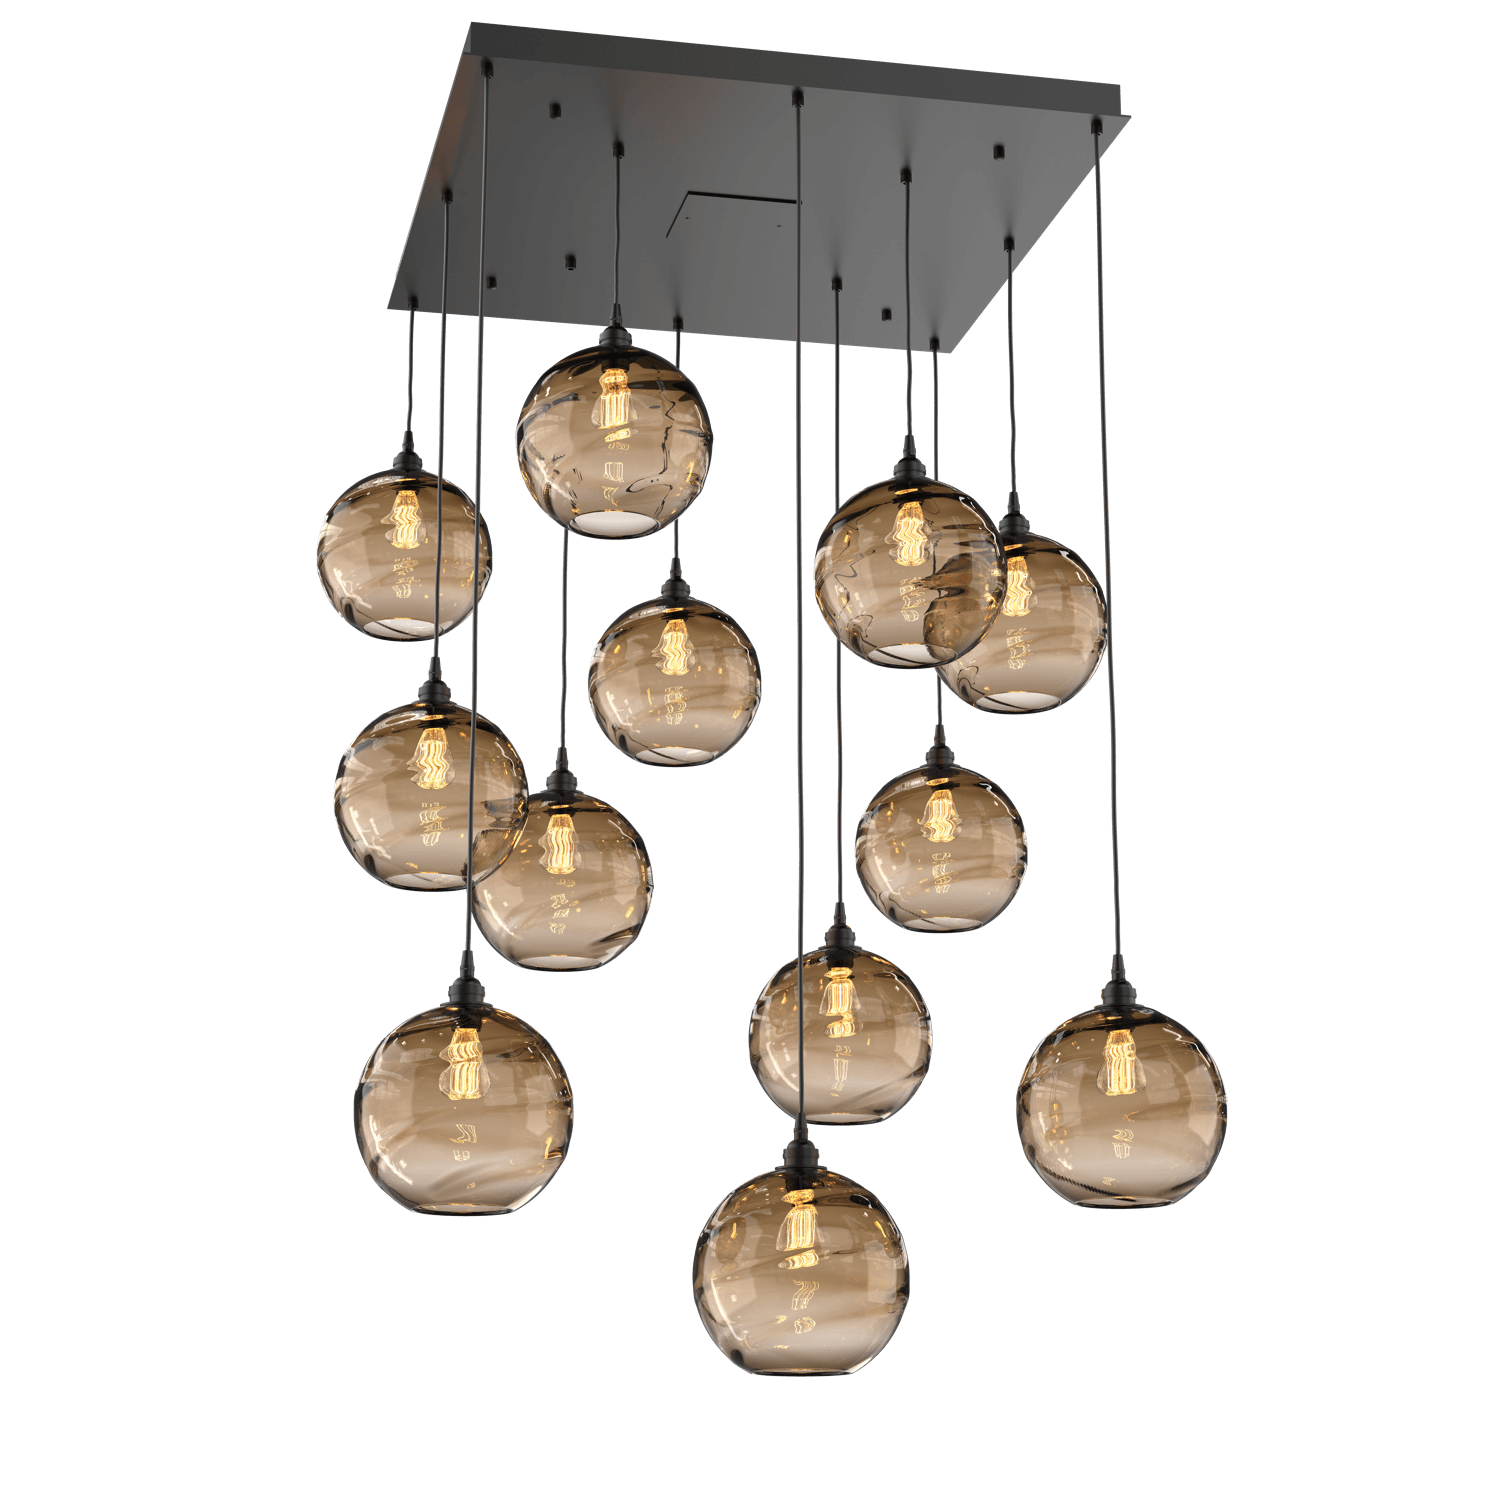 CHB0047-12-MB-OB-Hammerton-Studio-Optic-Blown-Glass-Terra-12-light-square-pendant-chandelier-with-matte-black-finish-and-optic-bronze-blown-glass-shades-and-incandescent-lamping